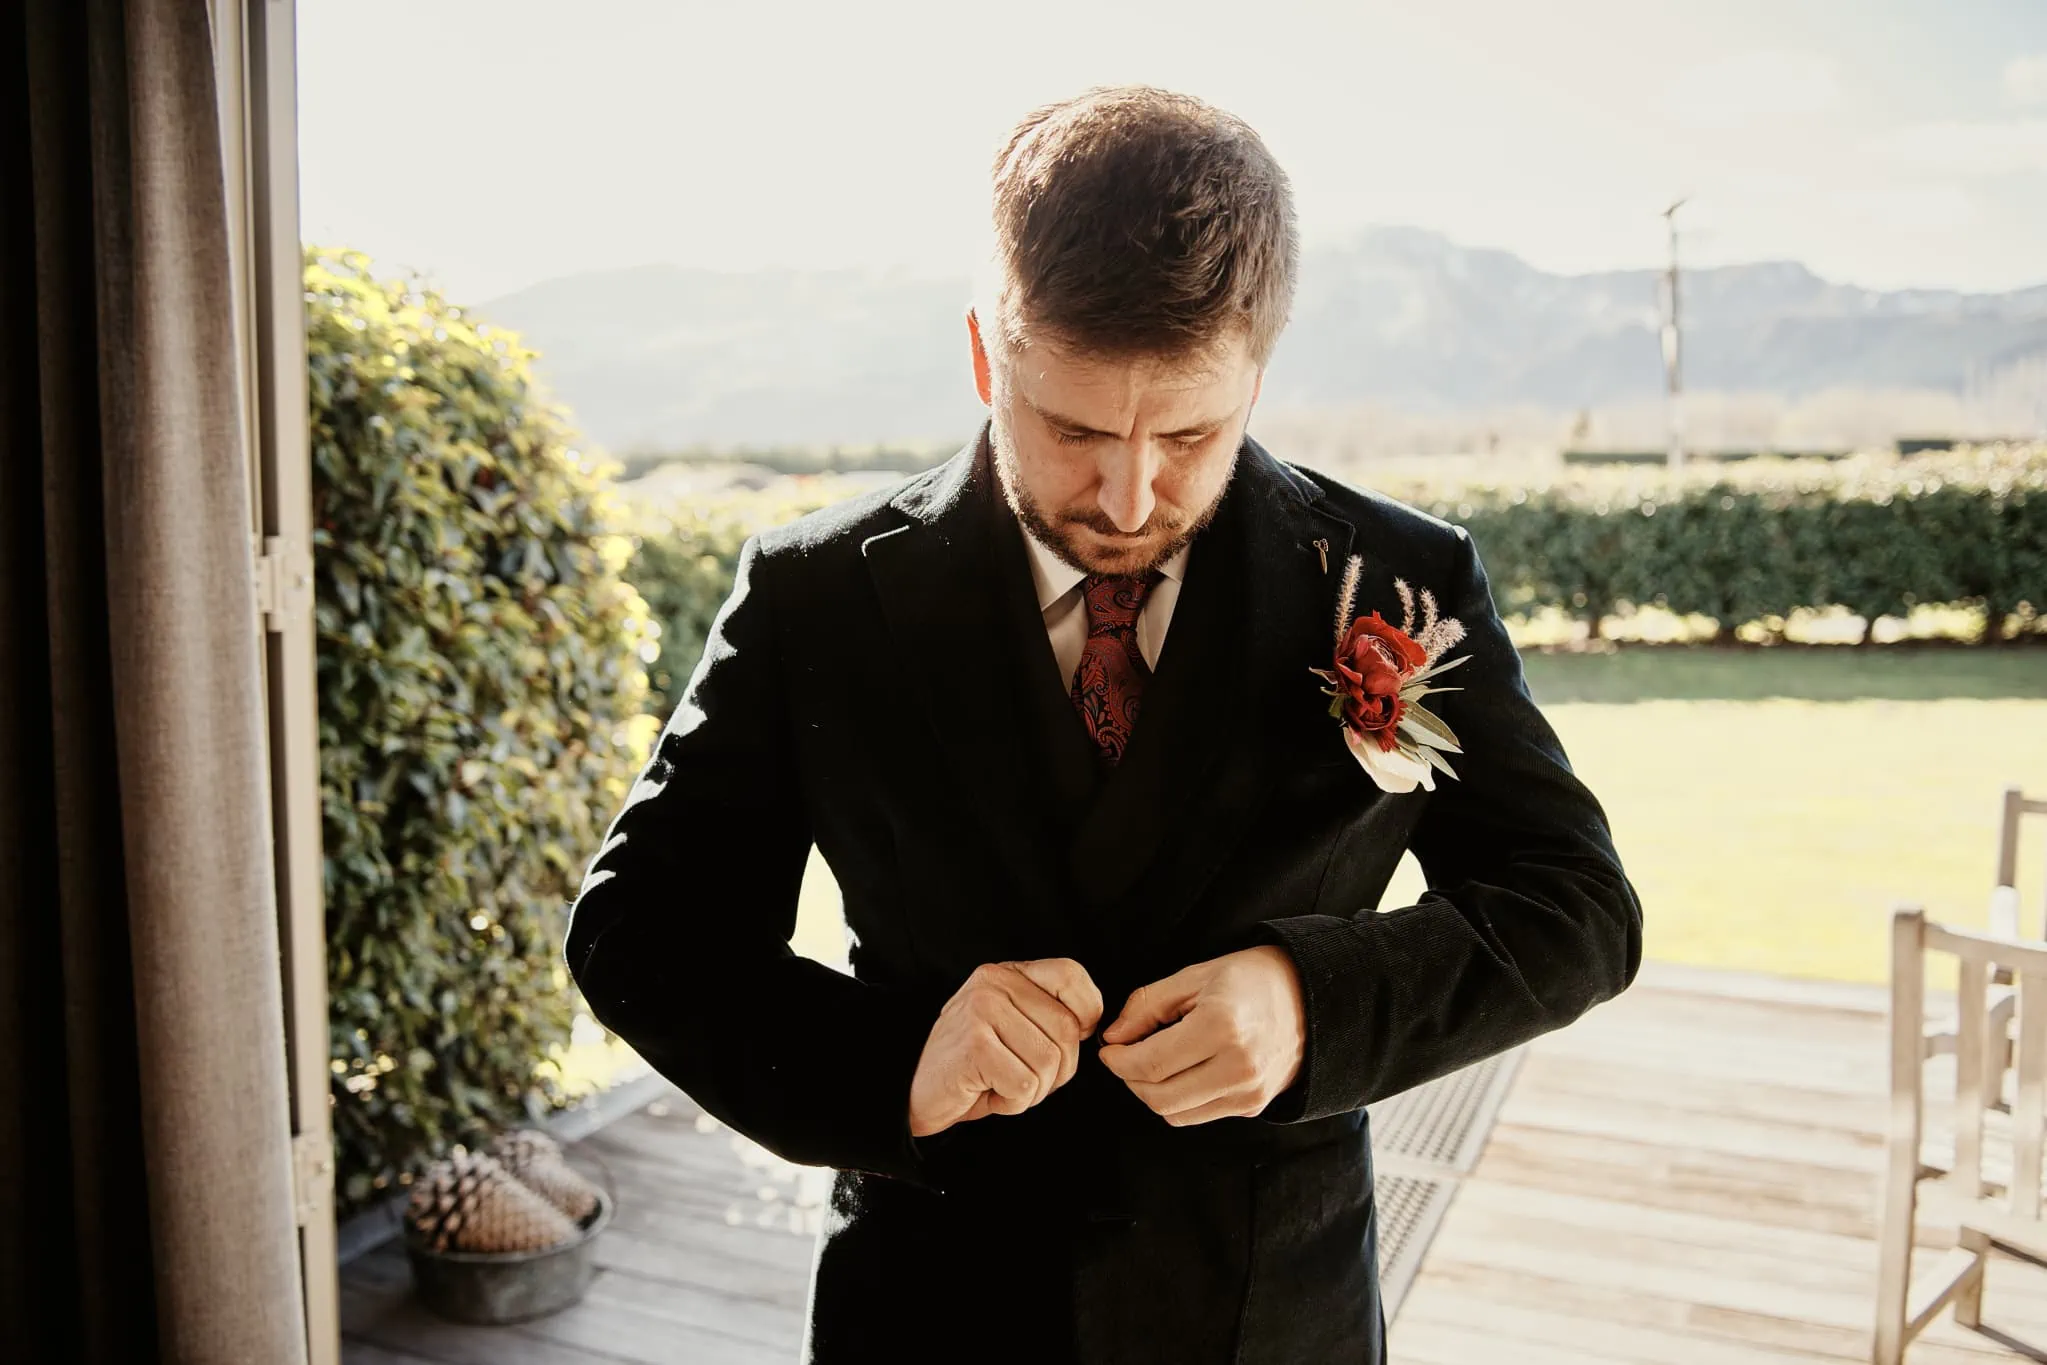 A man in a suit is adjusting his tie at Claire and Rob's heli elopement wedding at Cecil Peak.